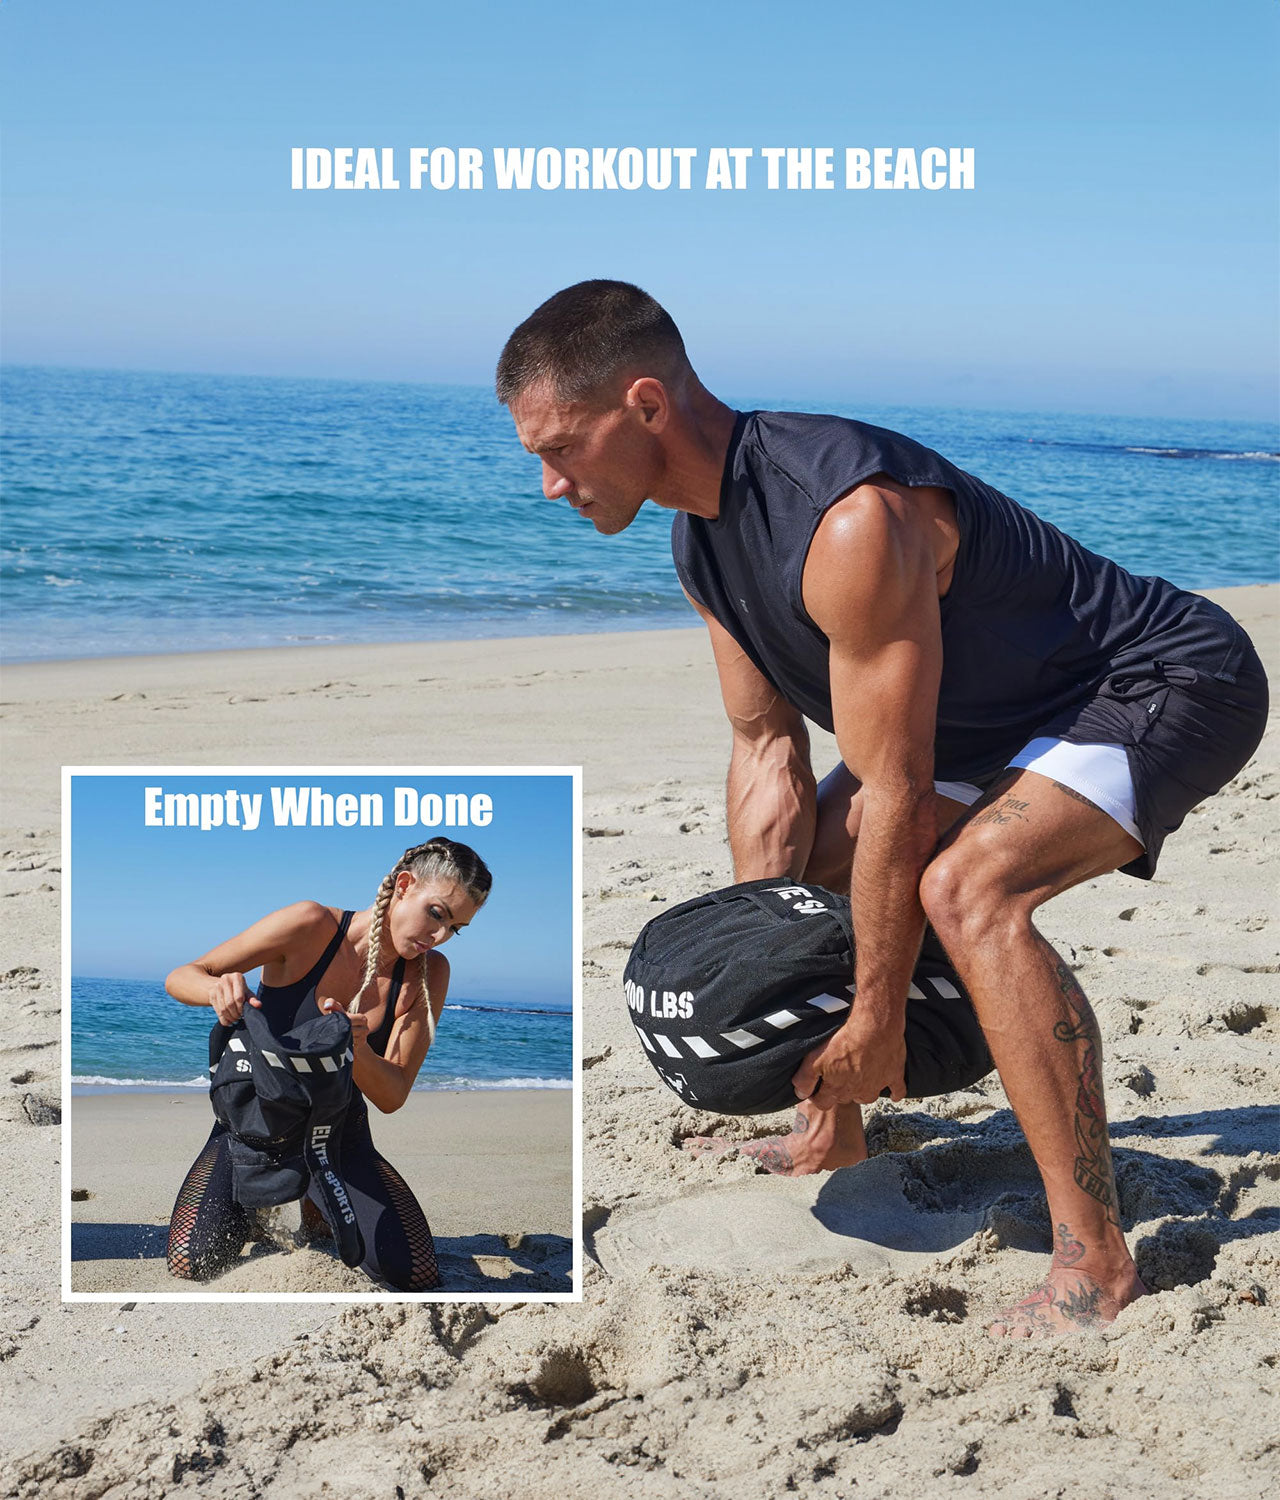 Elite Sports Core Round Workout Sandbag 100 lbs Ideal For Workout At the Beach